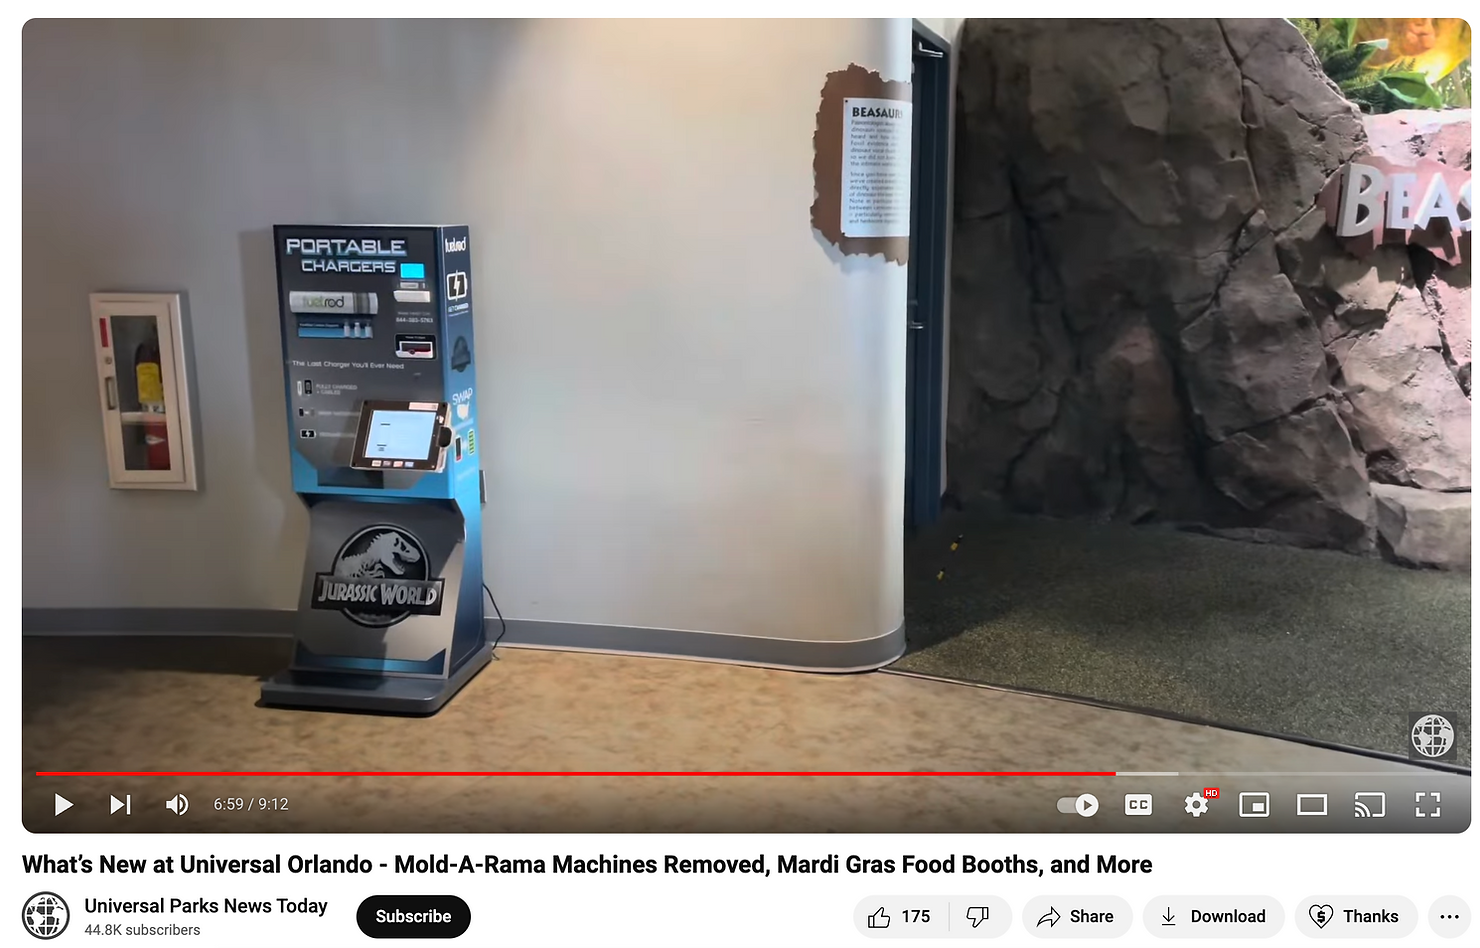 Screenshot from Universal Parks News Today Showing Where a Mold-A-Rama Machine Once Stood